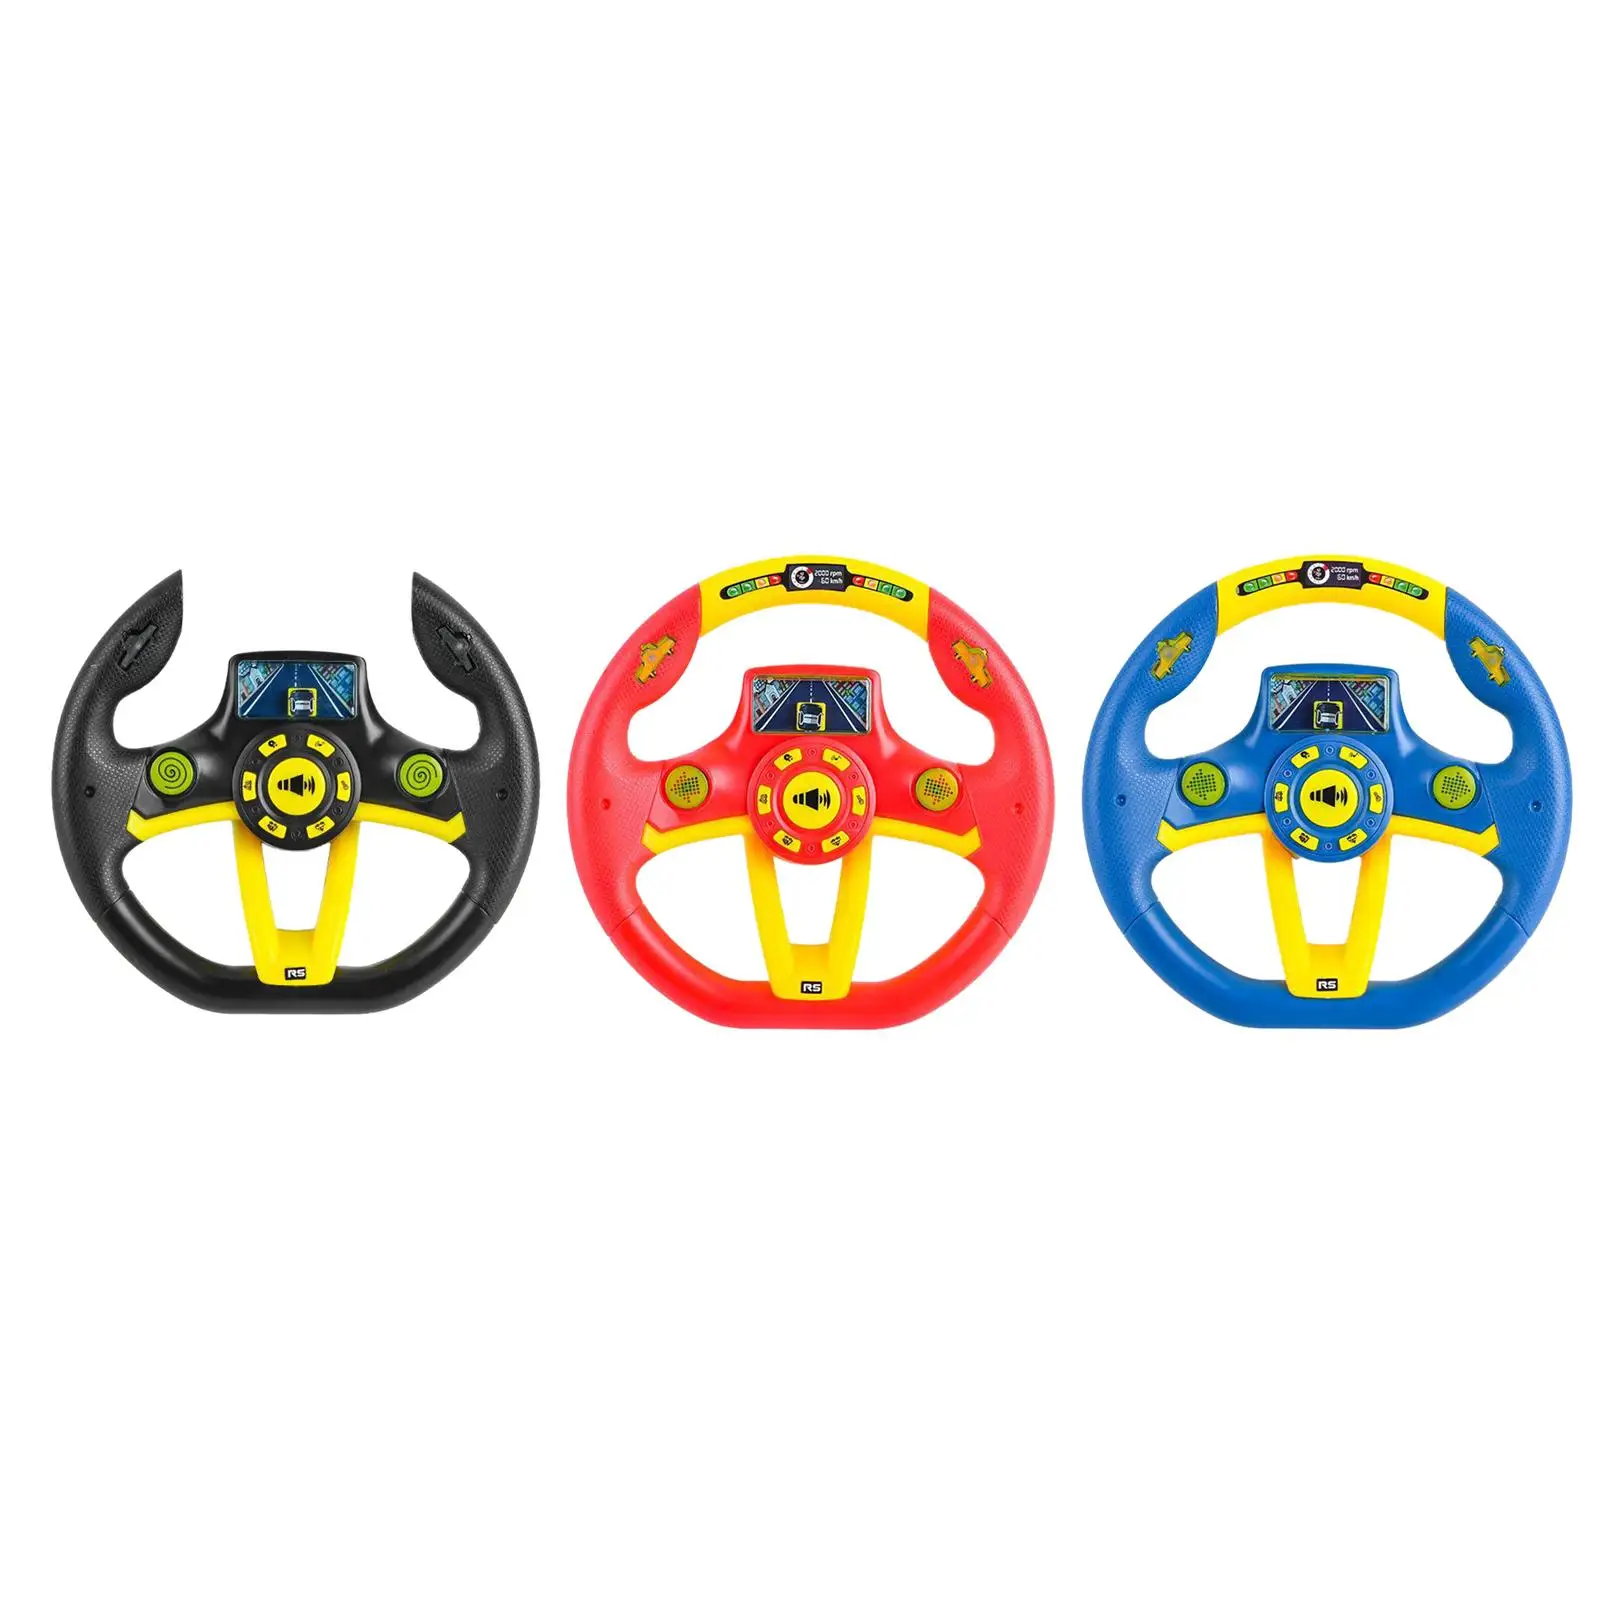 Round Steering Wheel Toy with Lights Kids Electric Wheel Toy for Playground Climbing Frame Amusement Park Treehouse Gifts